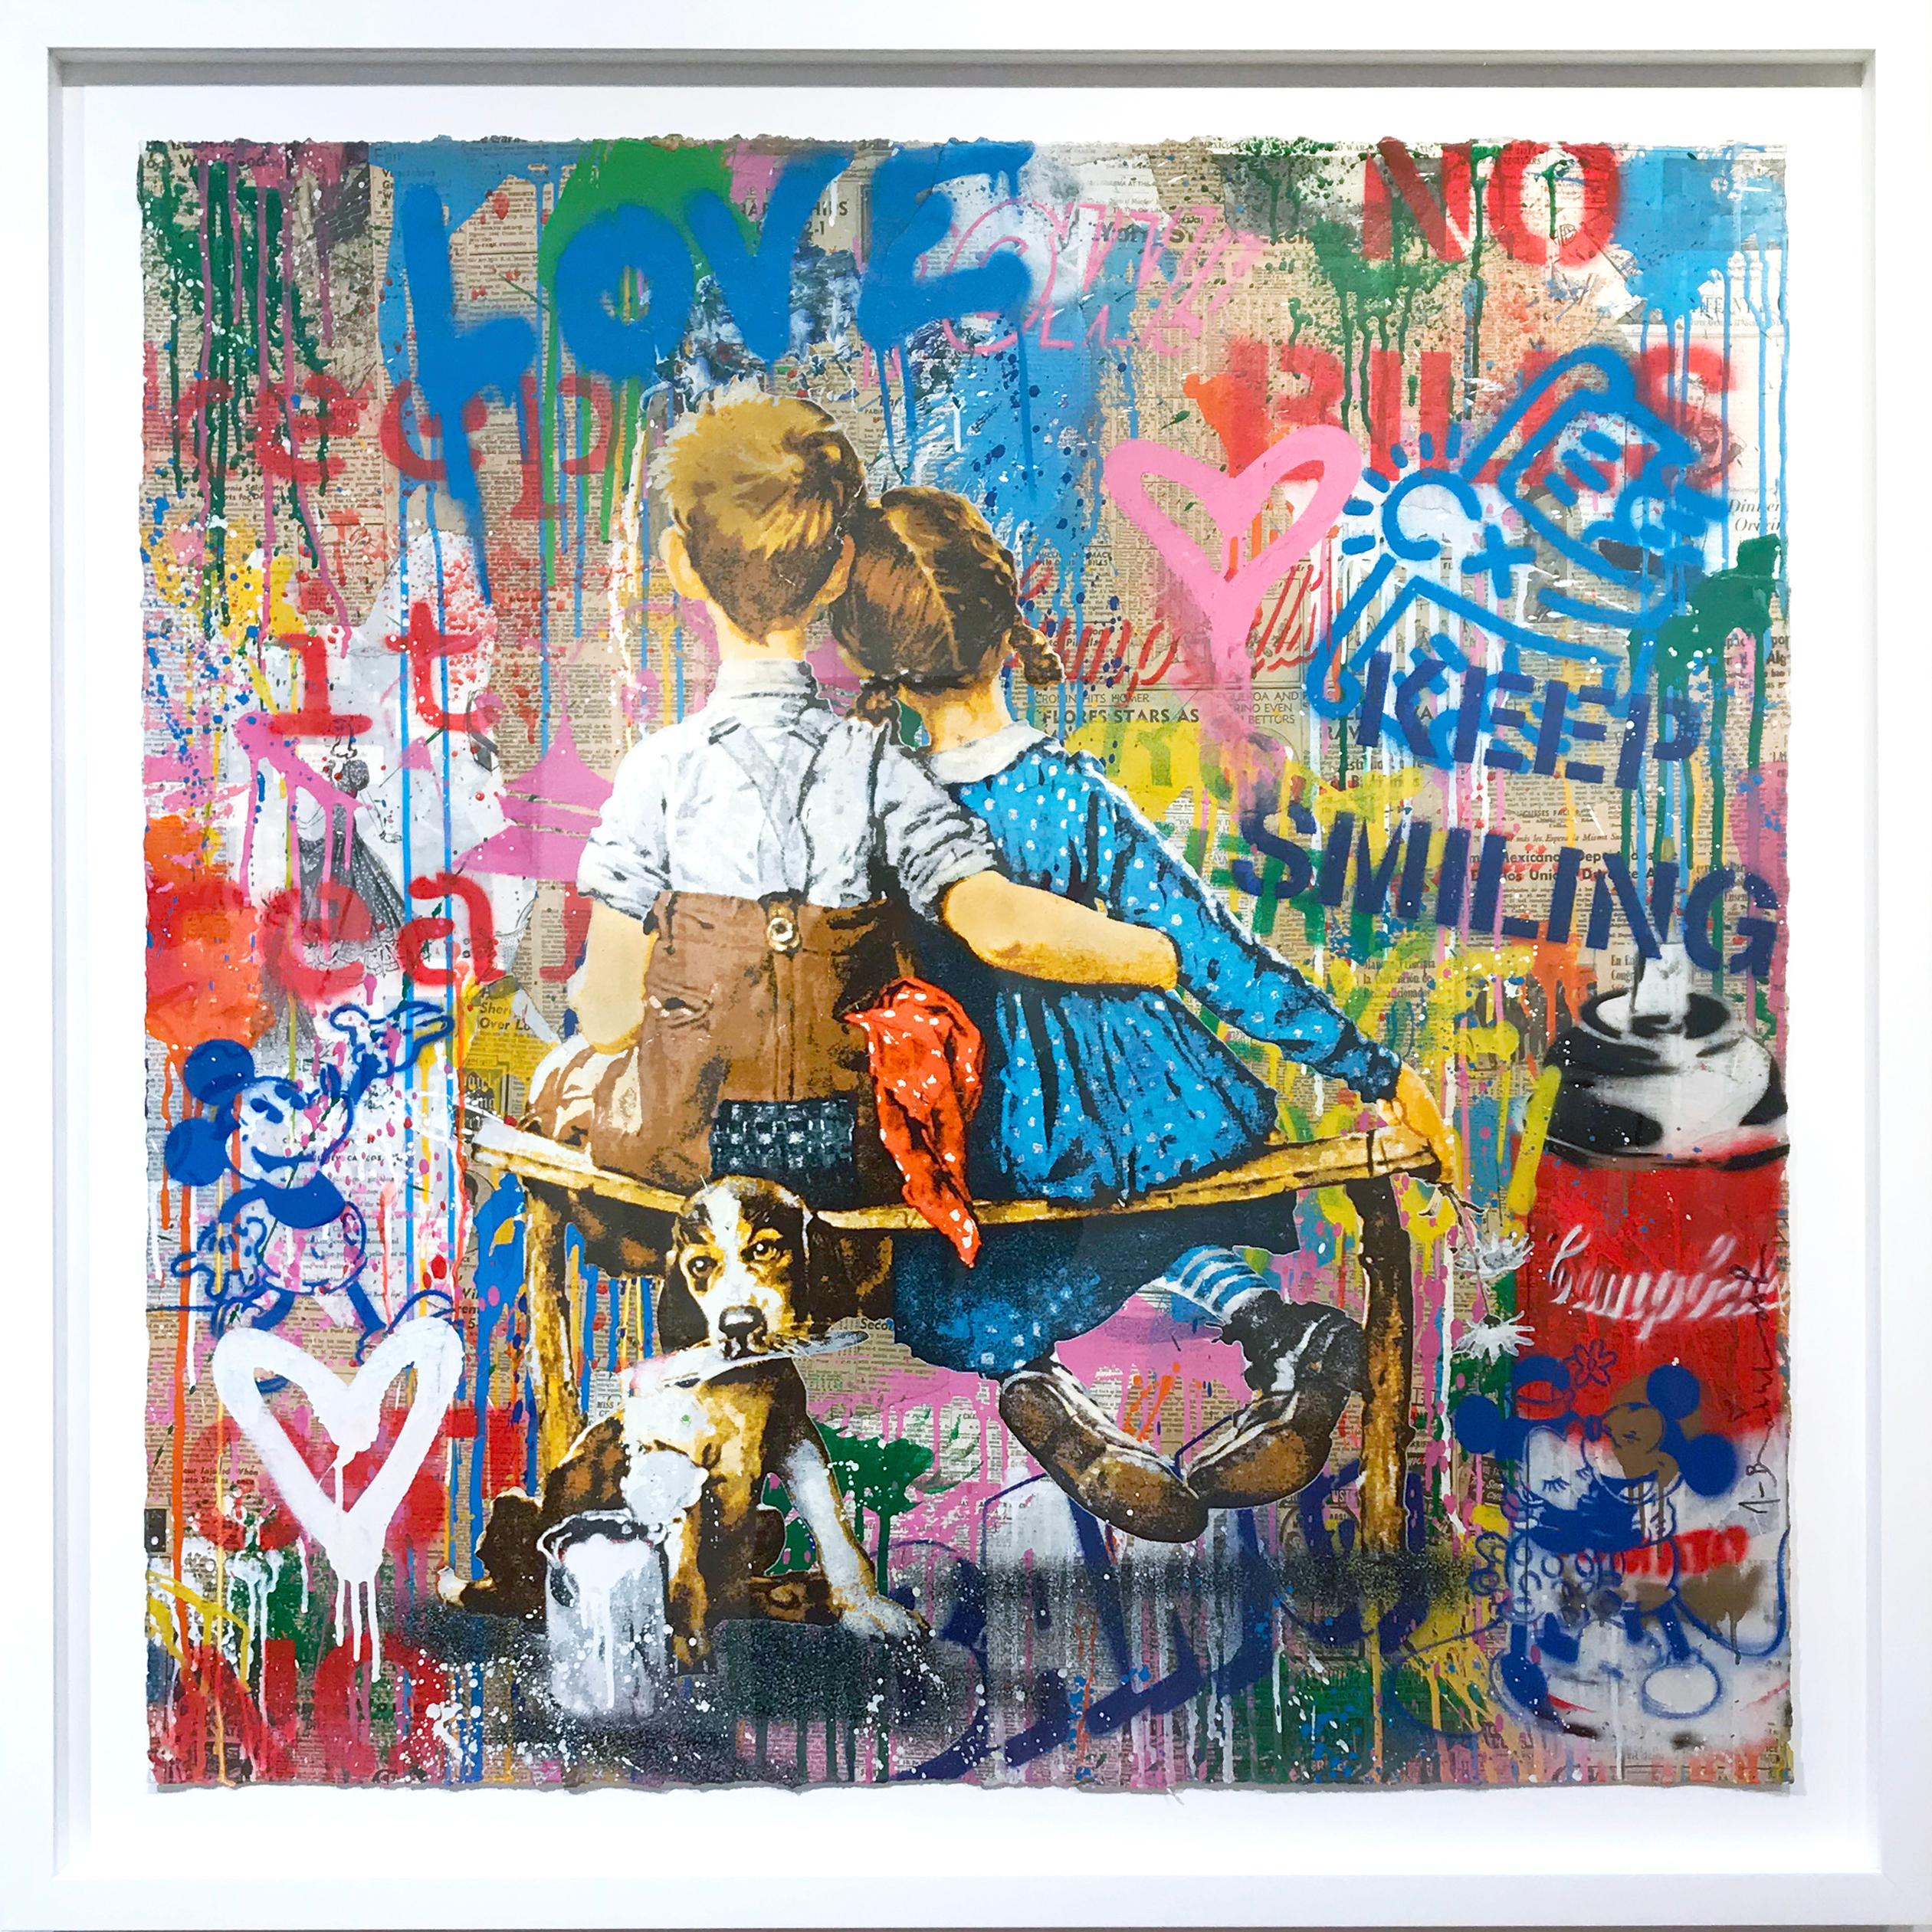 Work Well Together - Mixed Media Art by Mr. Brainwash